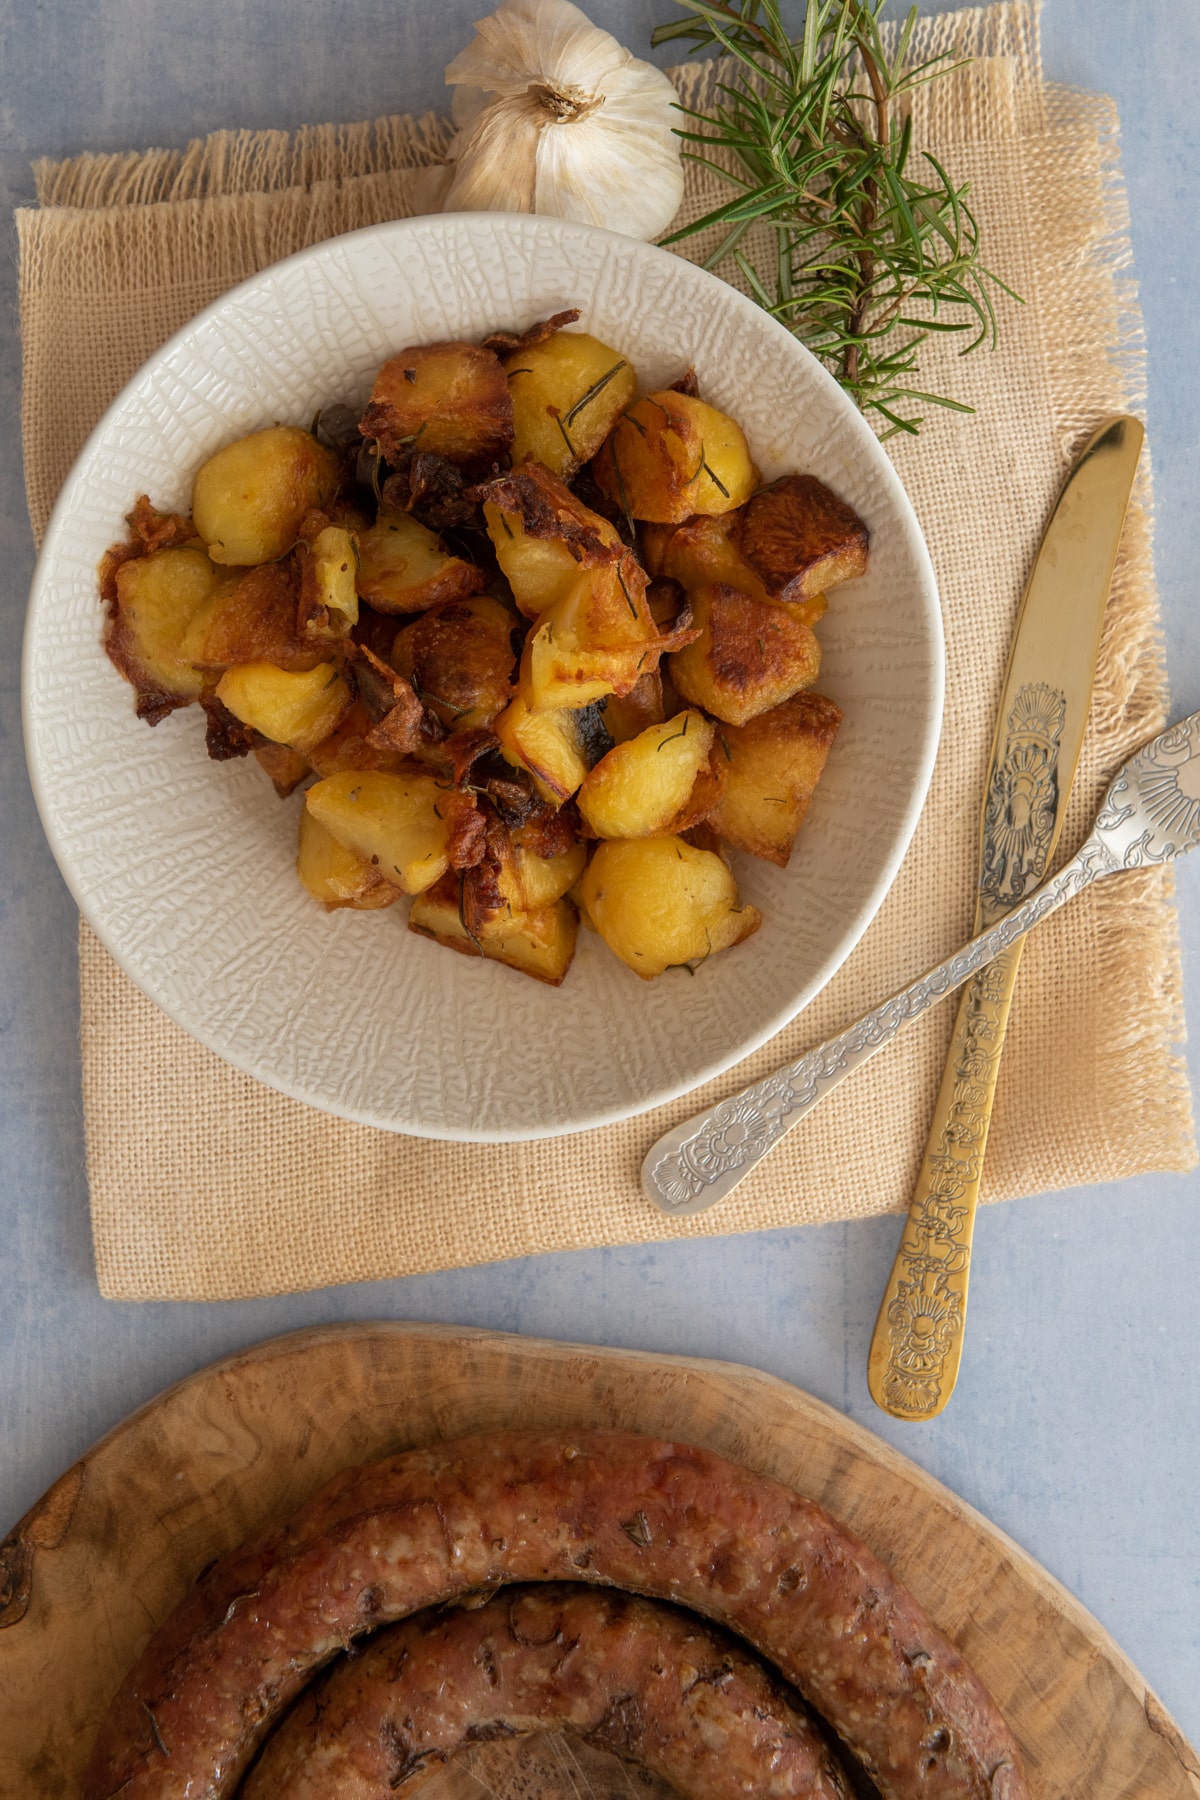 Easy Crispy Italian Roasted Potatoes Recipe with rosamary and garlic served with Italian sausage